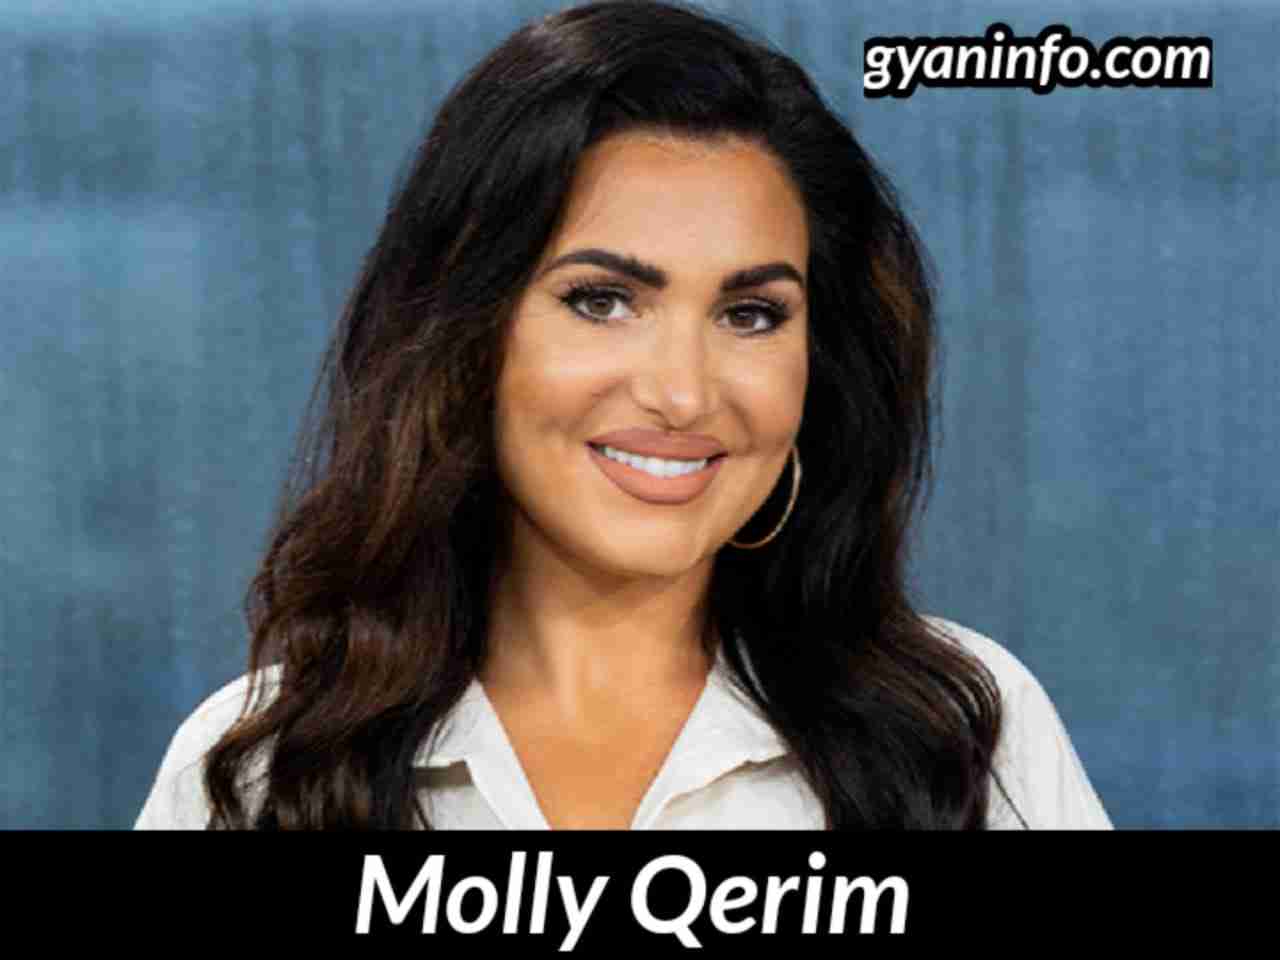 Molly Qerim Biography, Age, Height, Husband, Parents, Body Measurement, Net Worth & More